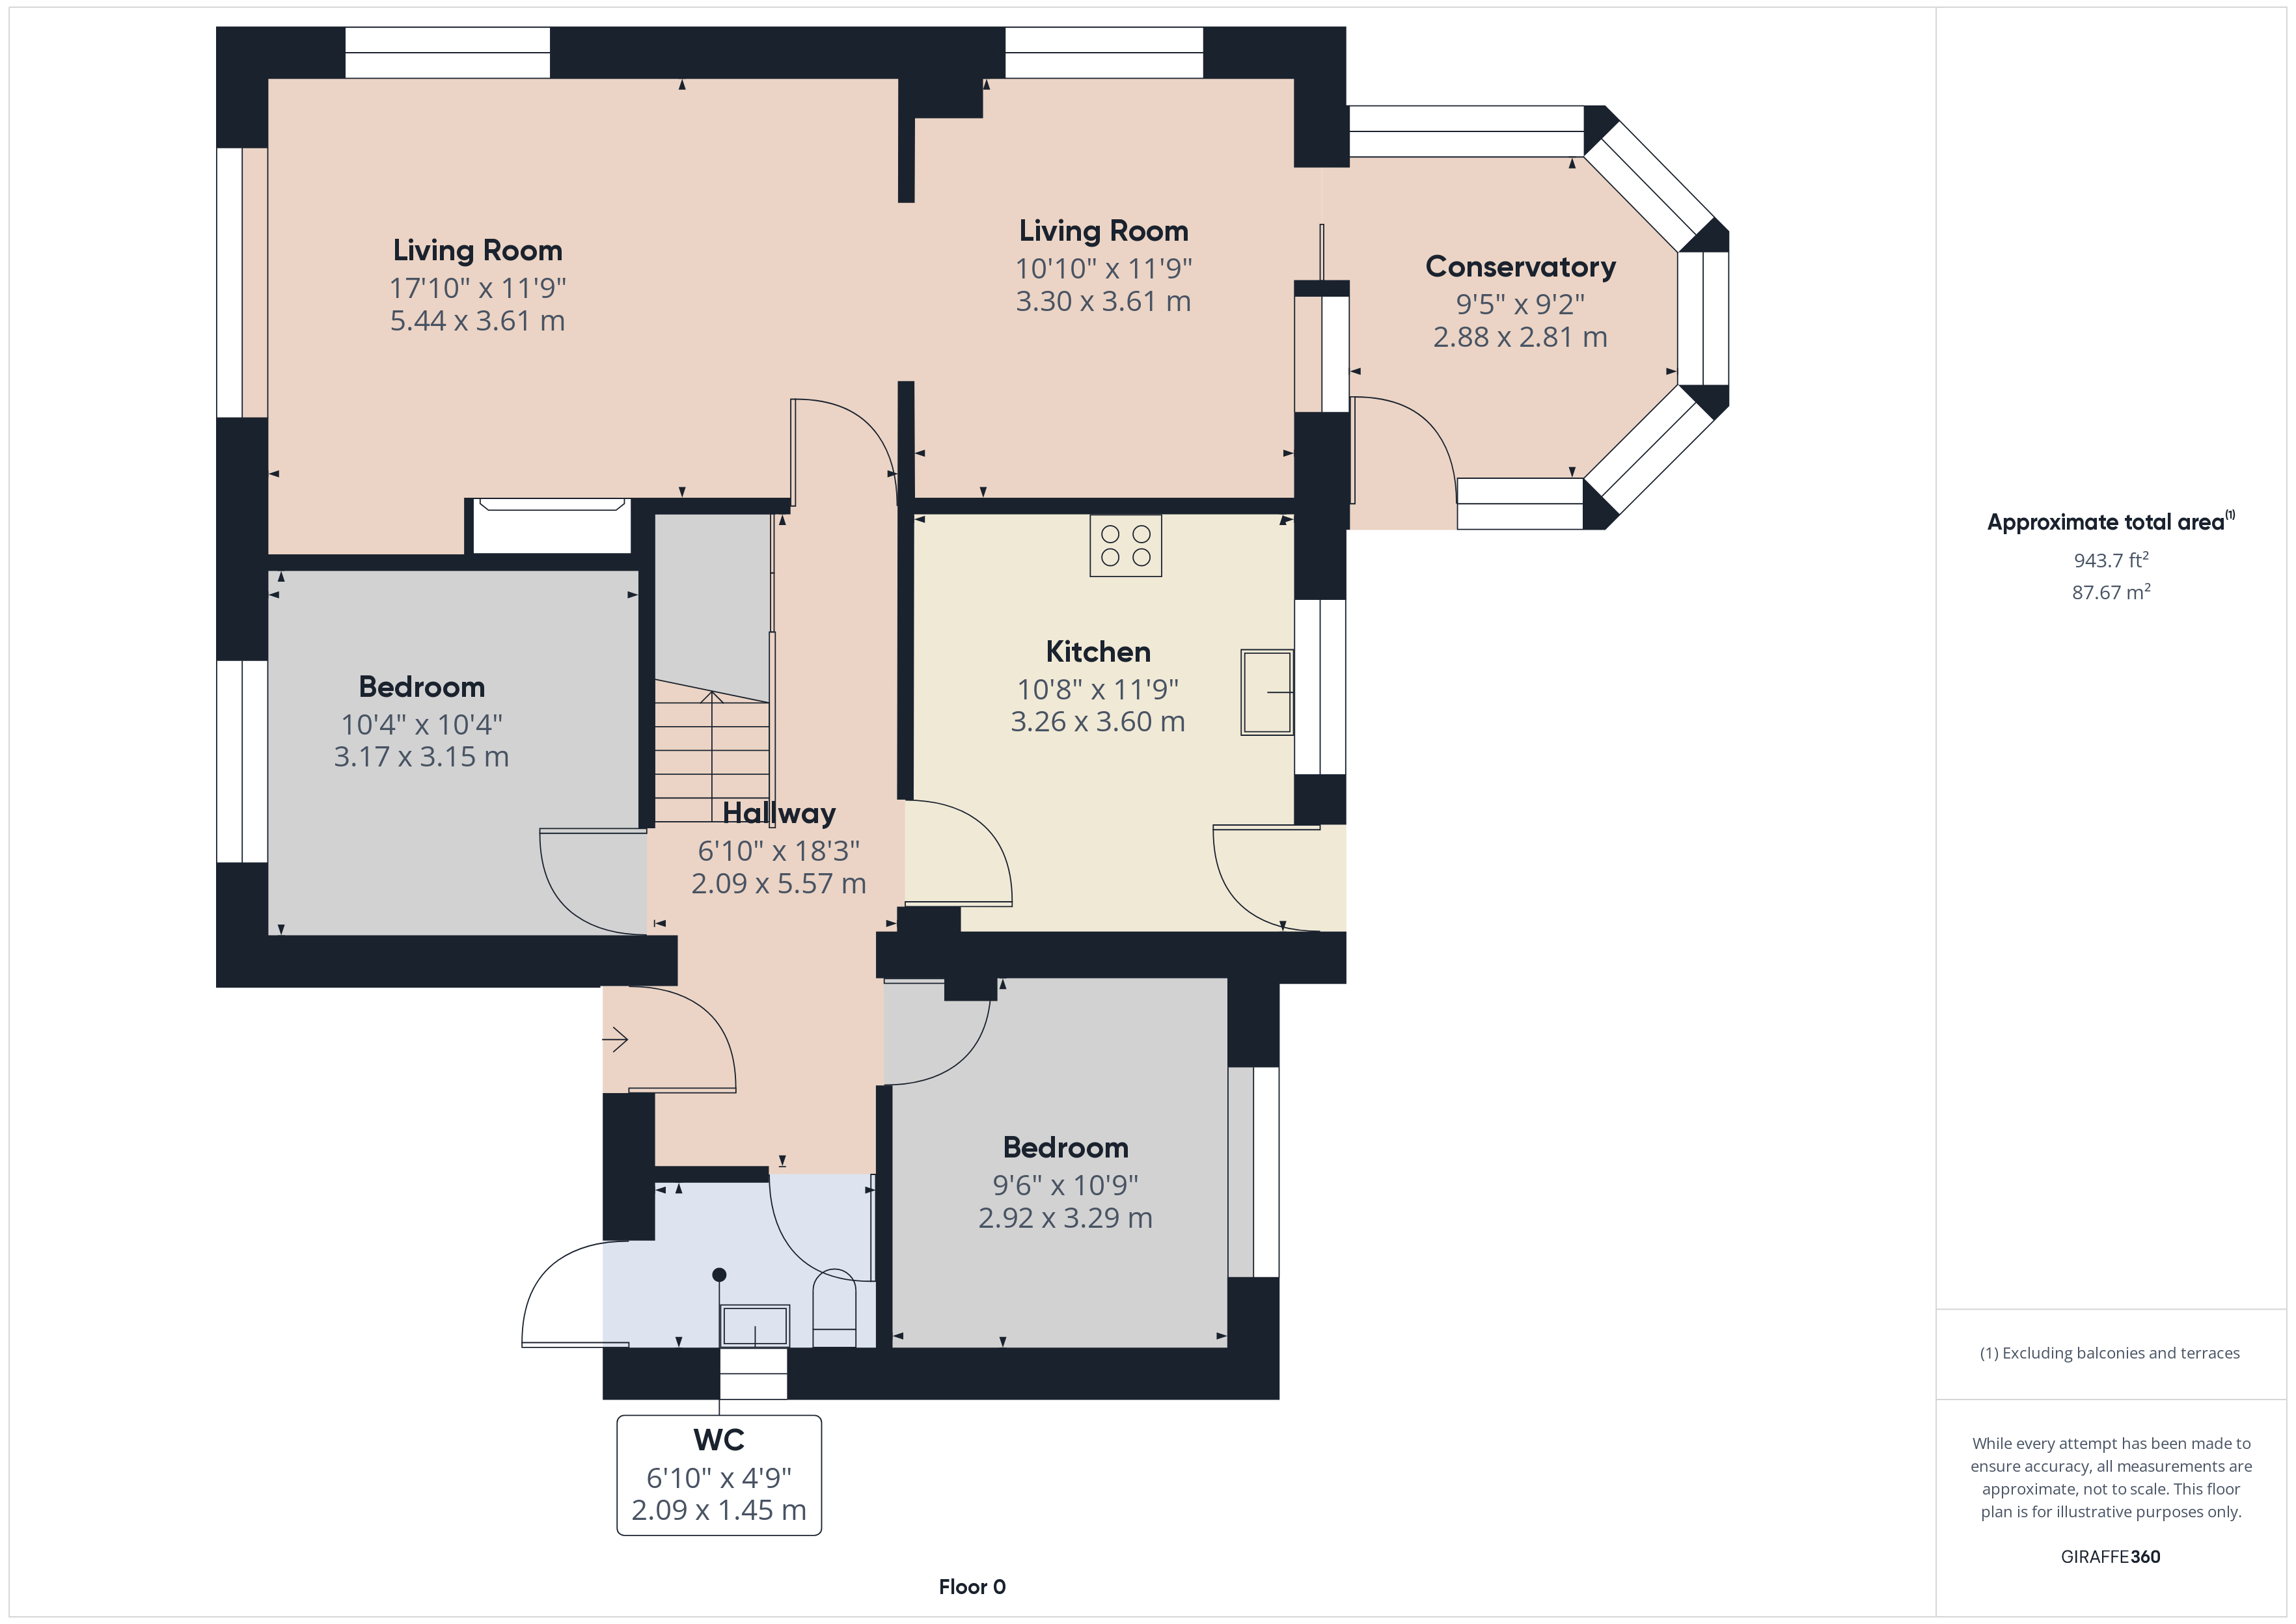 4 bed bungalow for sale - Property floorplan